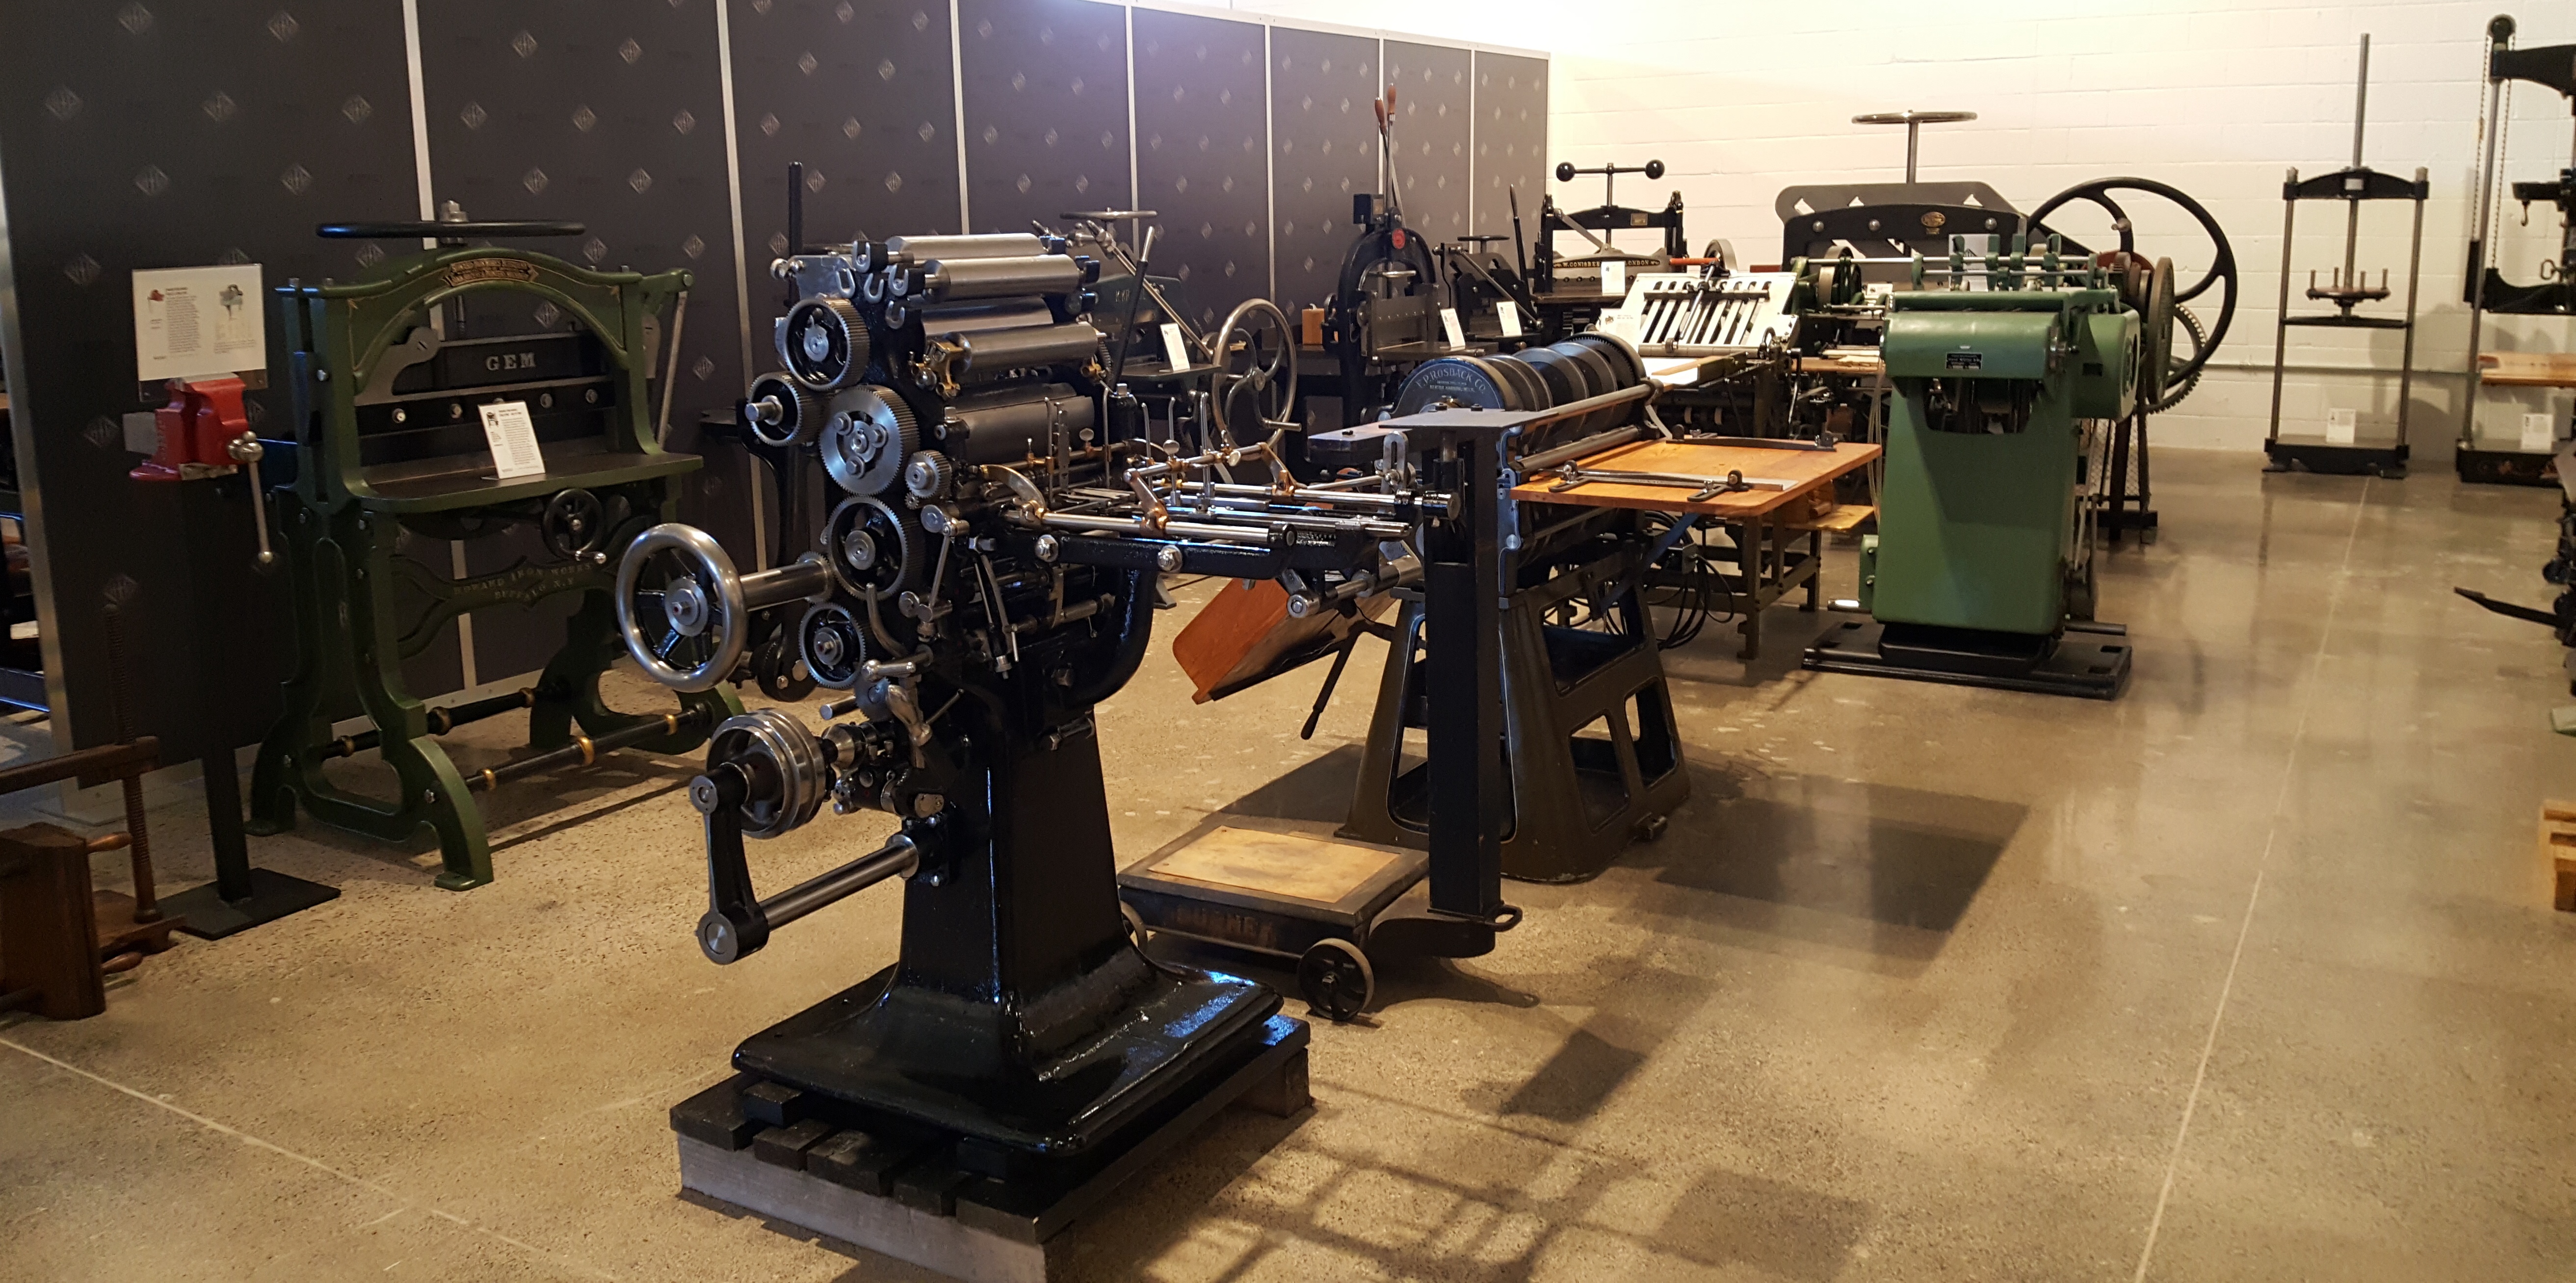 Another bay, containing guillotines, bookbinding presses, a rotary pin perforator, and in the foreground, a very compact and photogenic sheet-fed rotary press.